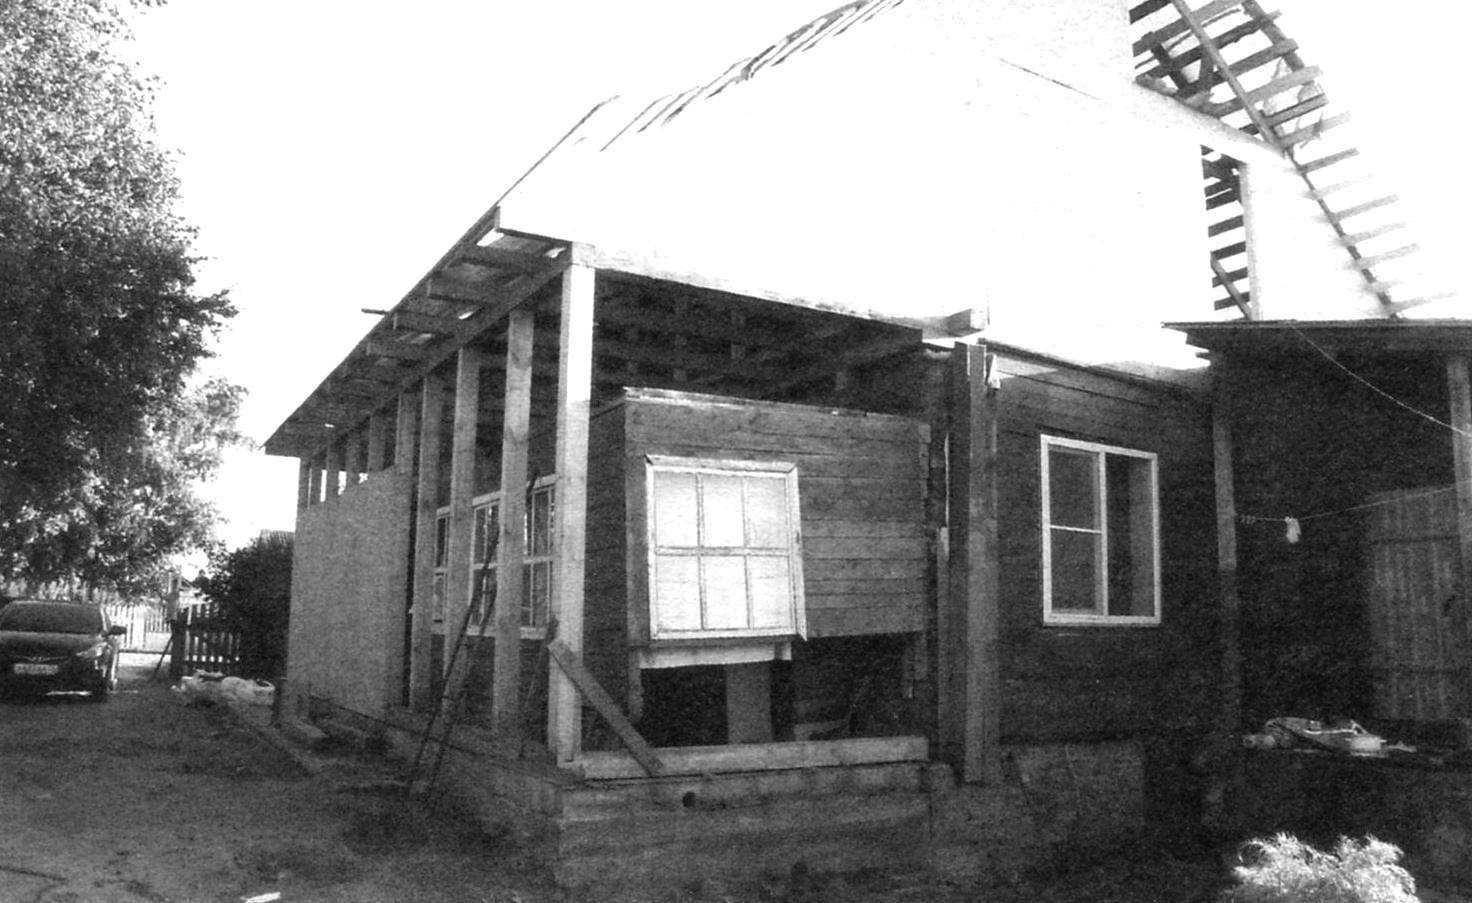 Casing frame front and side walls, new porches, pediments of the same house oriented strand Board (OSB) and the device of the new common roof over both parts of the structure. The back wall of the verandah is not yet covered - it will make dismantled the old porch